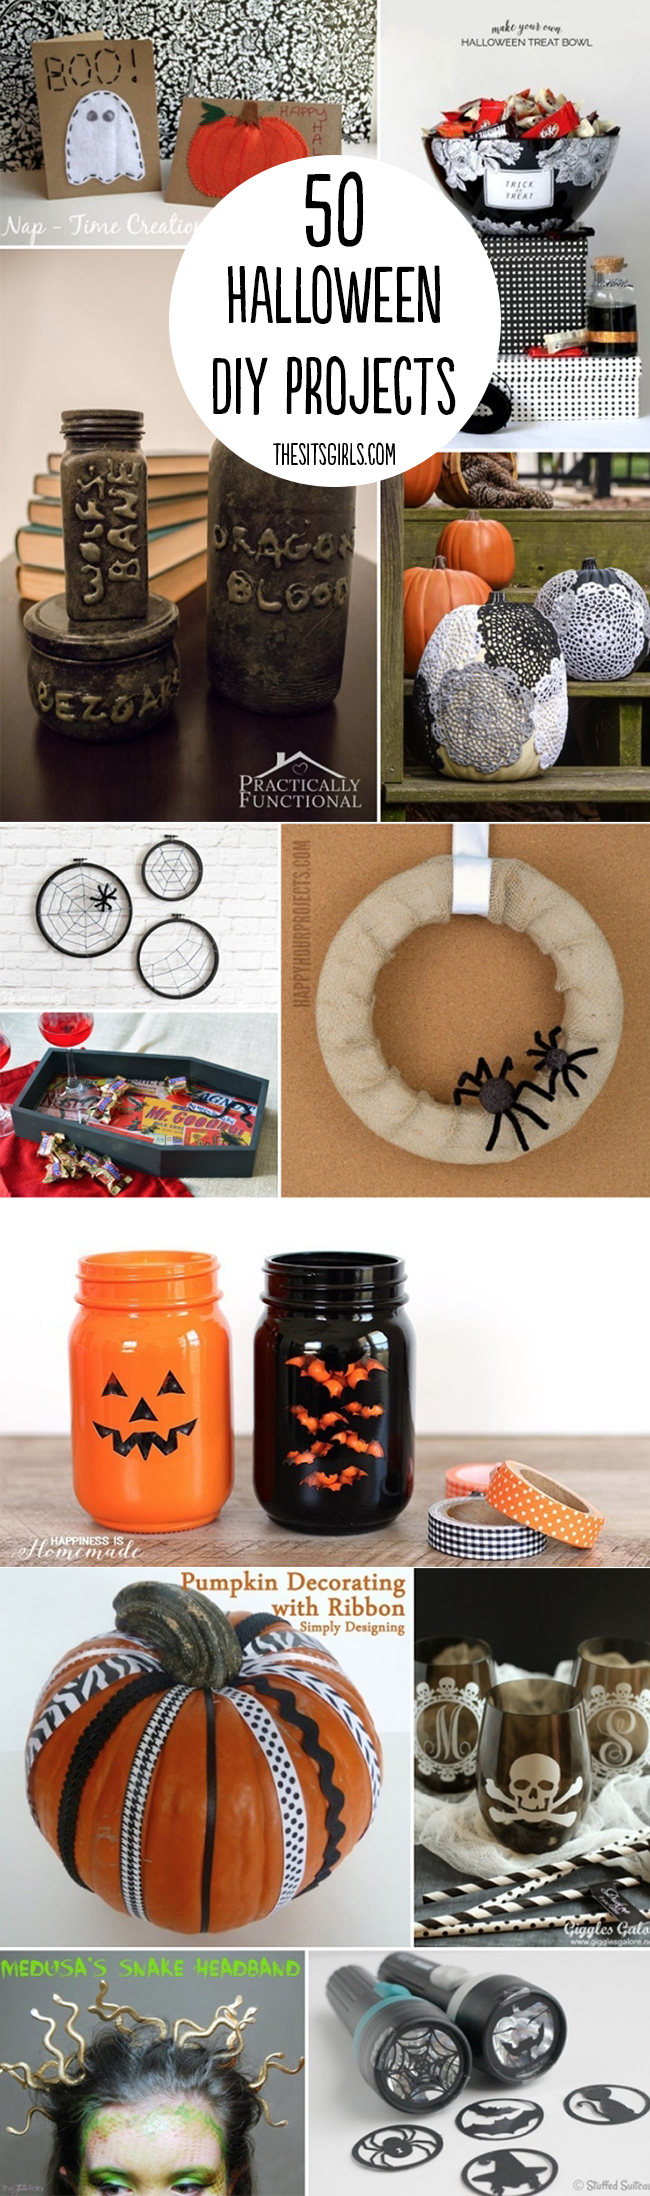 Halloween DIY | 50 great DIY projects you can do for Halloween, from decorations to costumes.